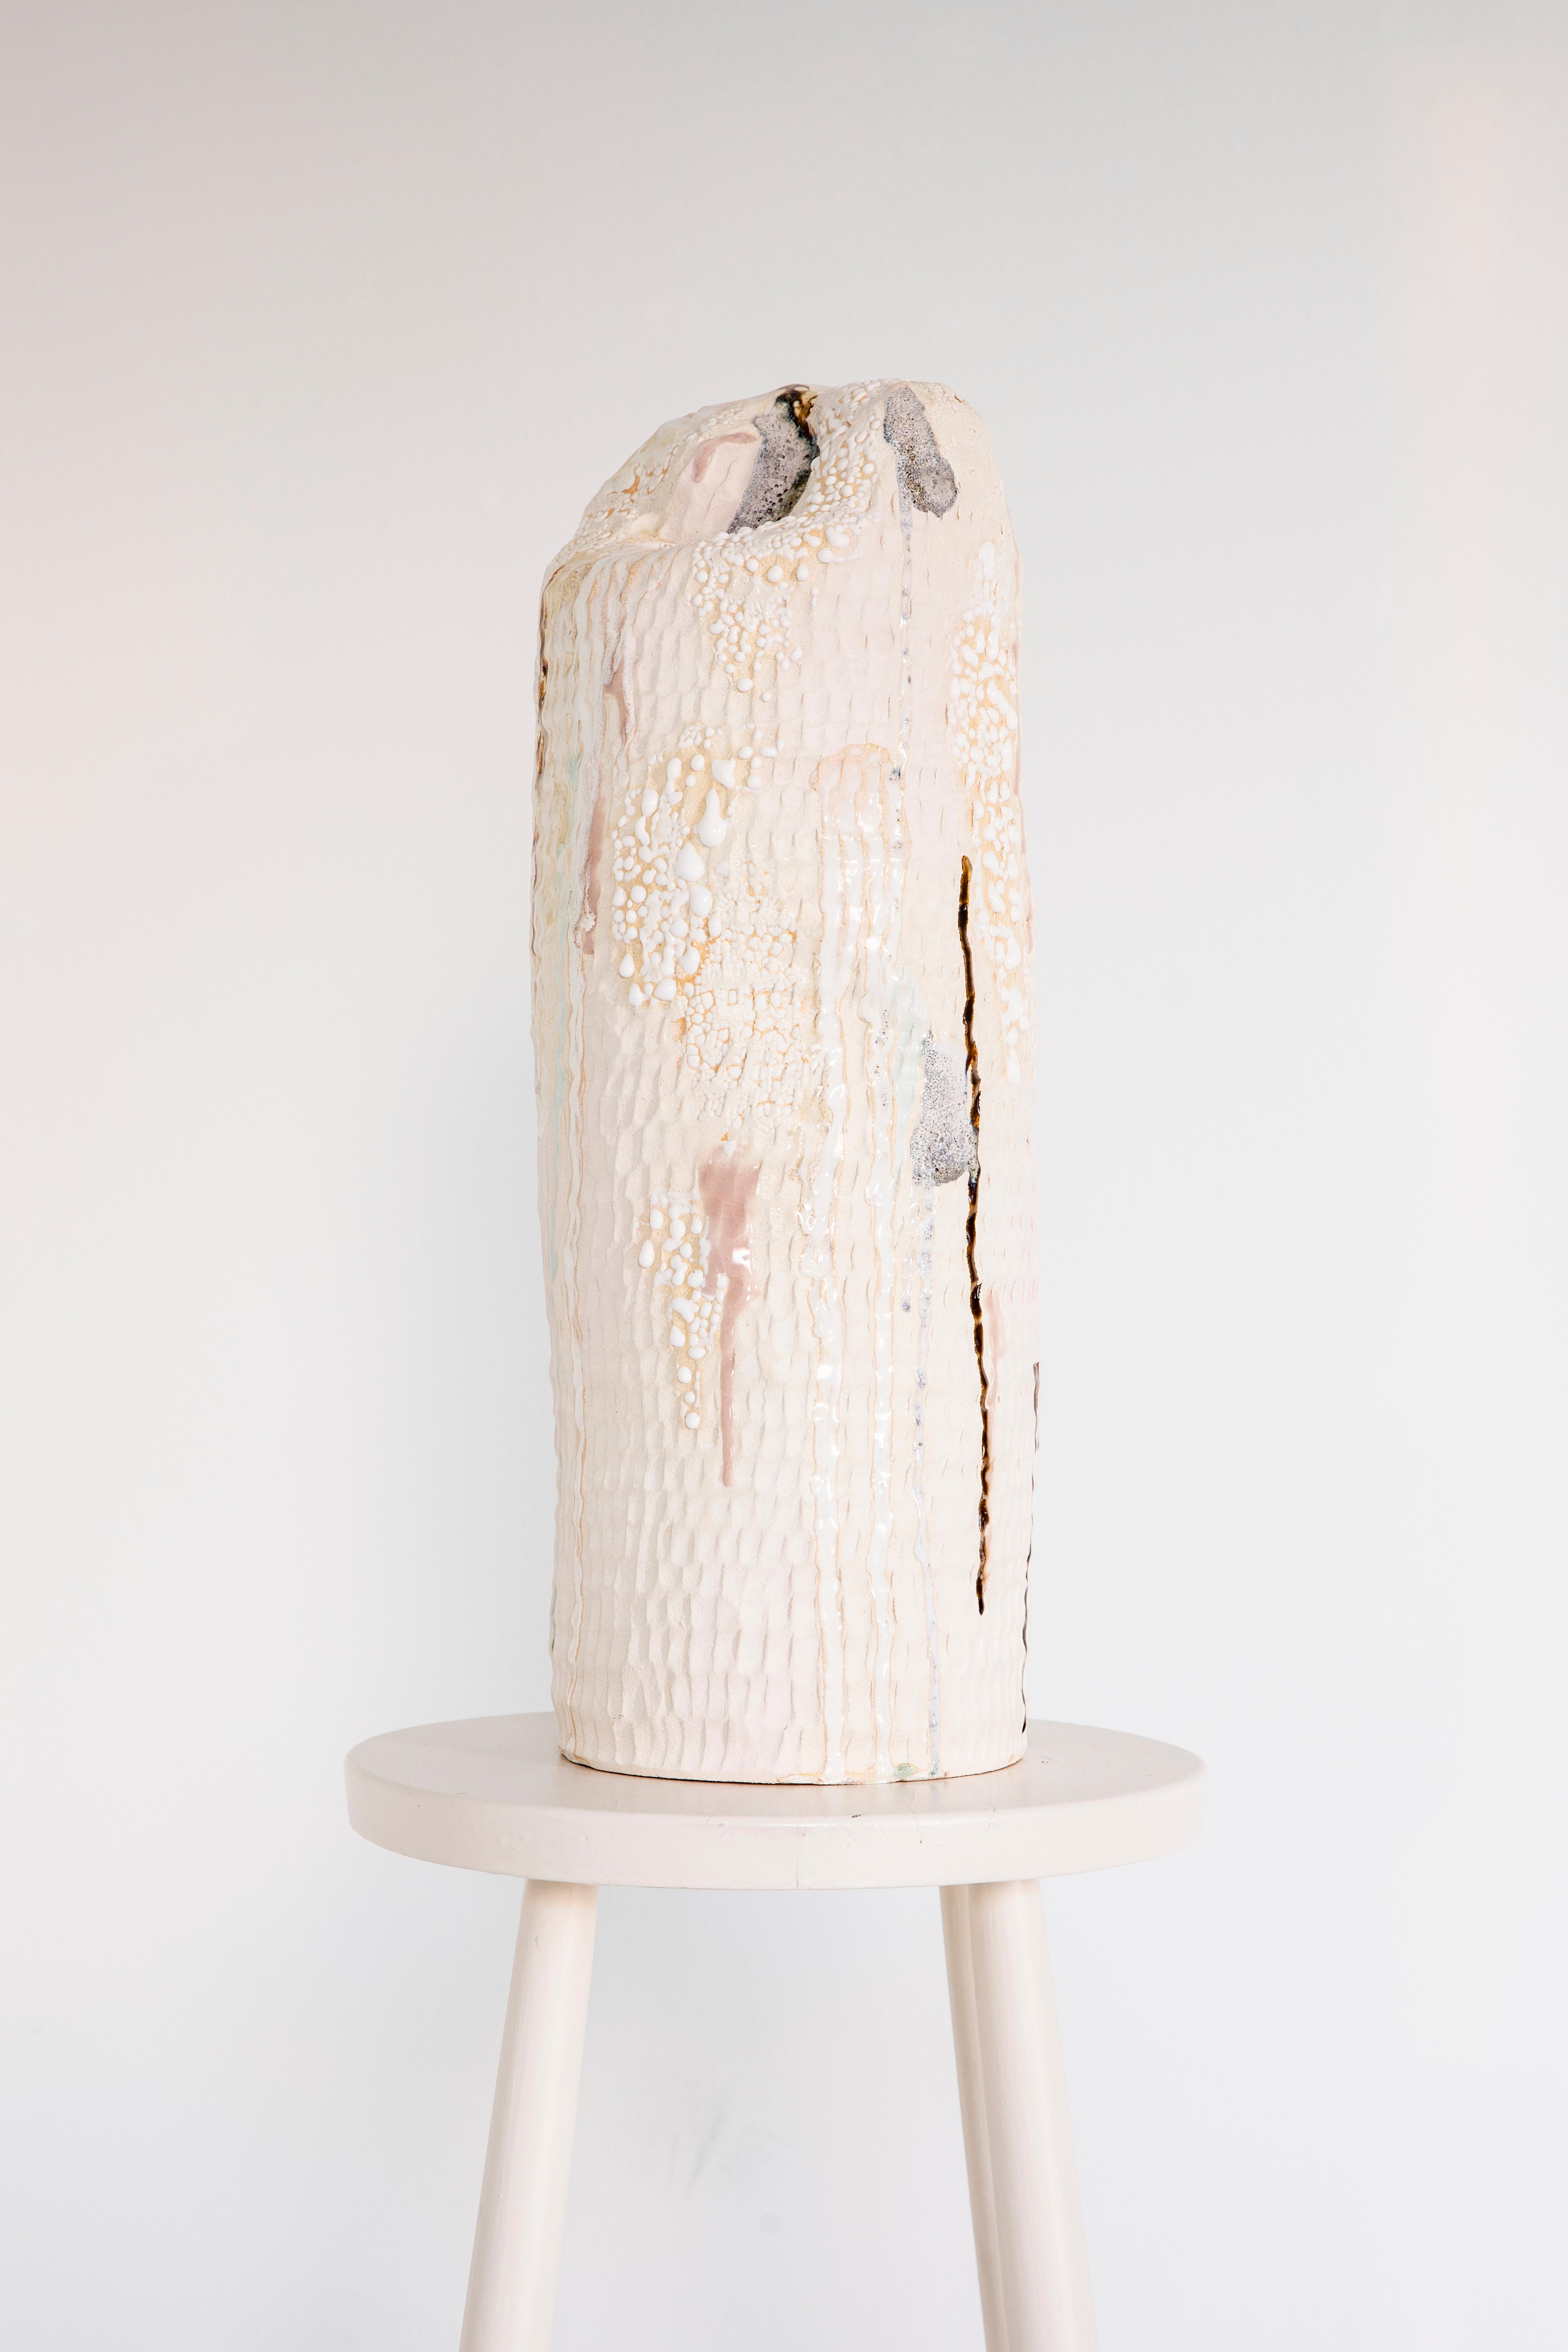 Big Pale Asparagus Decorative Object by Laura Pehkonen
Unique Piece.
Dimensions: D 19 x W 19 x H 53 cm.
Materials: Hand-built ceramic, engobe, underglaze colors, self-developed and ready-made glazes.

Laura Pehkonen (b. 1985) is a ceramic and visual